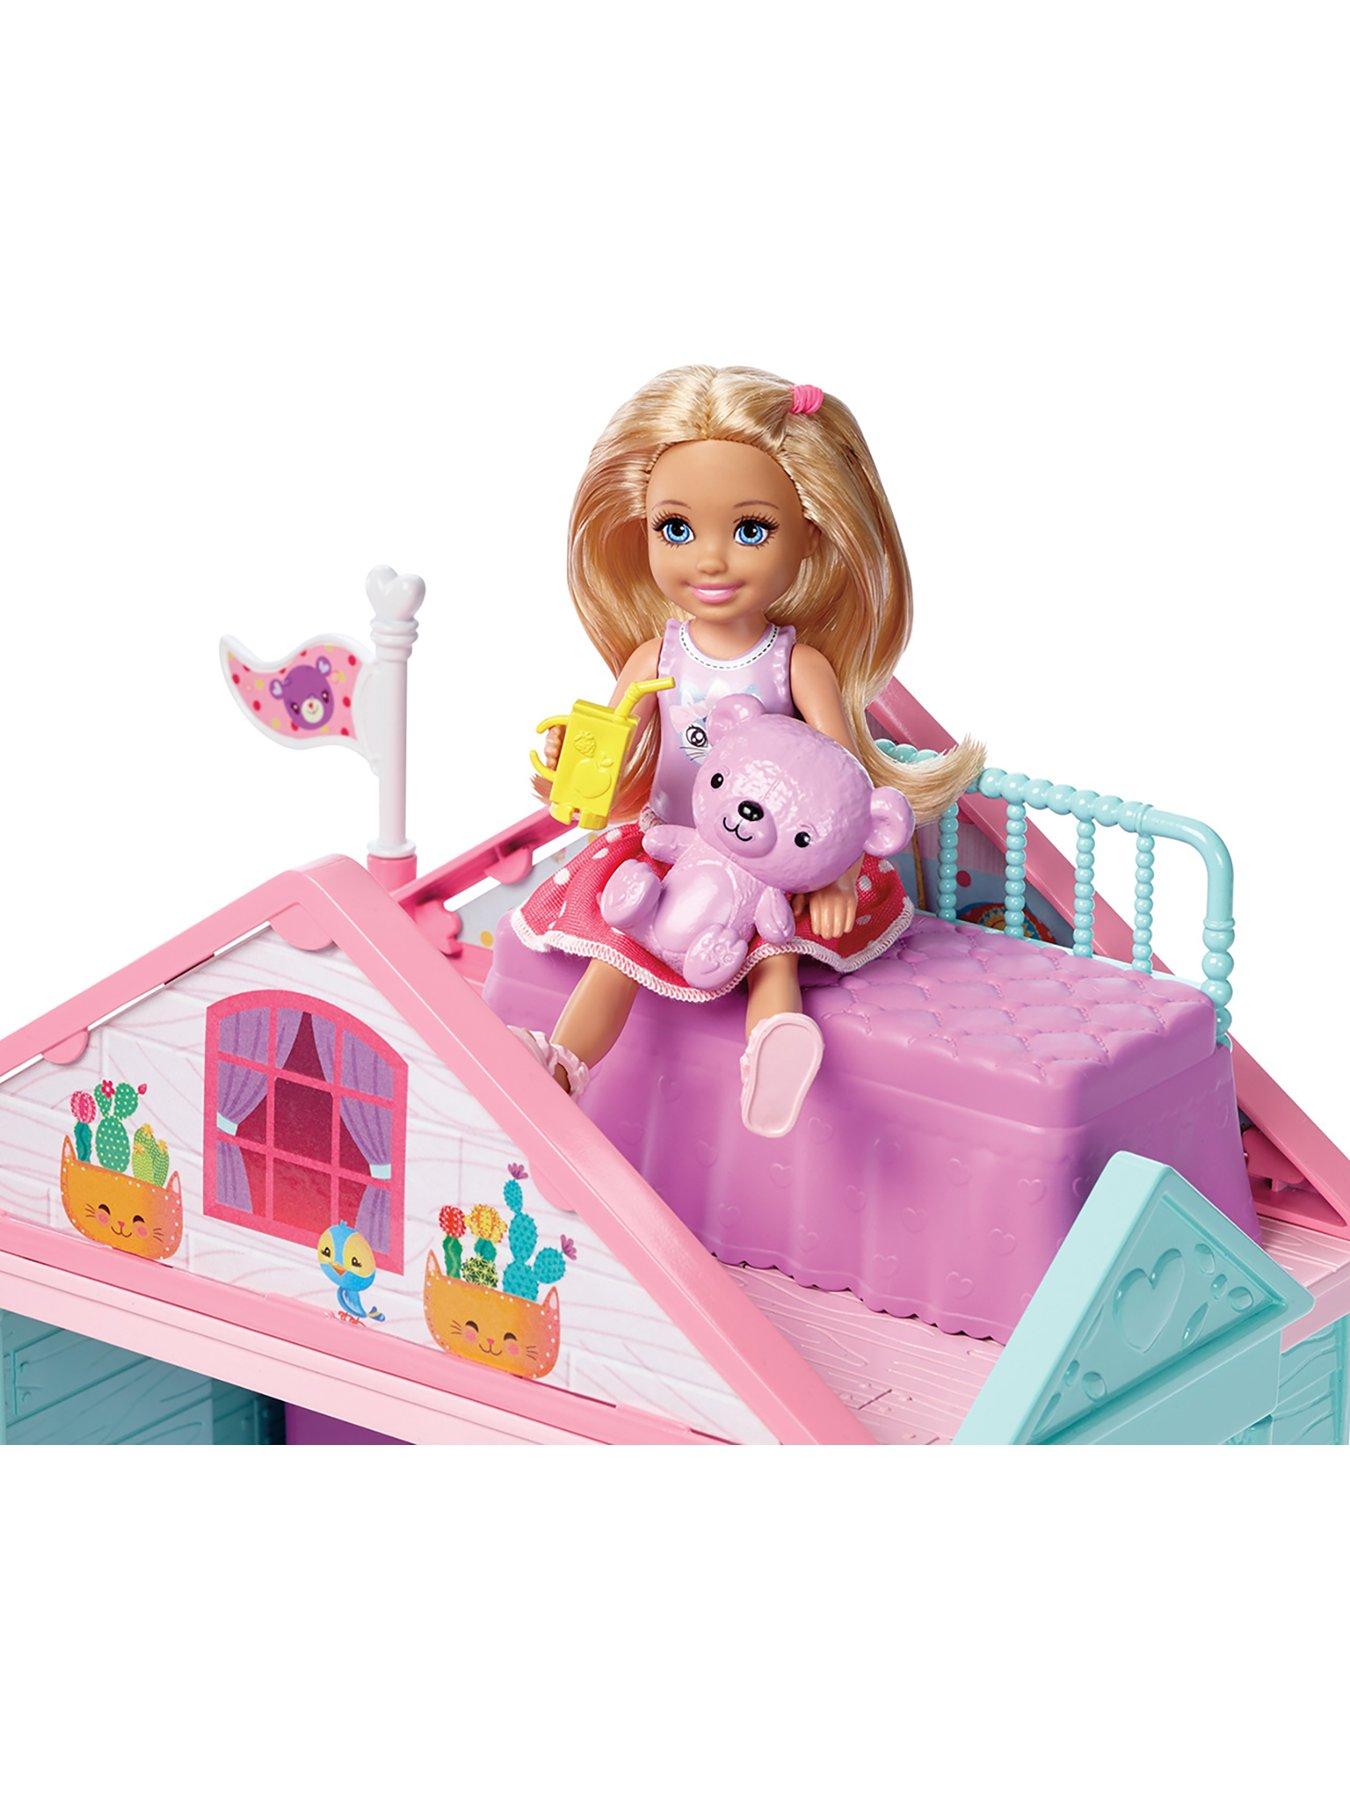 barbie club chelsea doll and playhouse